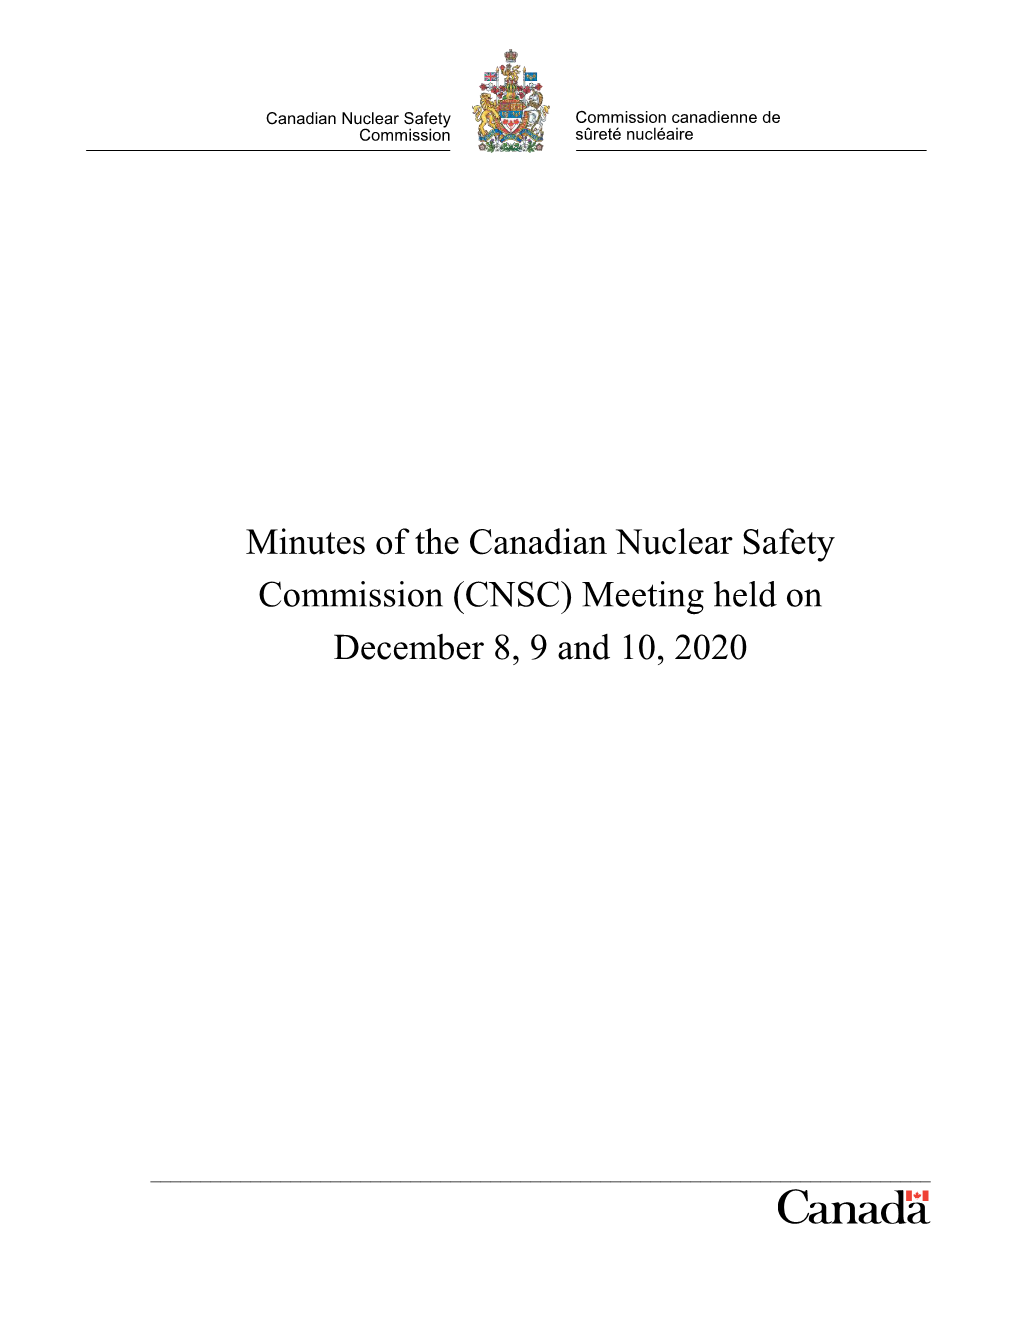 Minutes of the Canadian Nuclear Safety Commission (CNSC) Meeting Held on December 8, 9 and 10, 2020